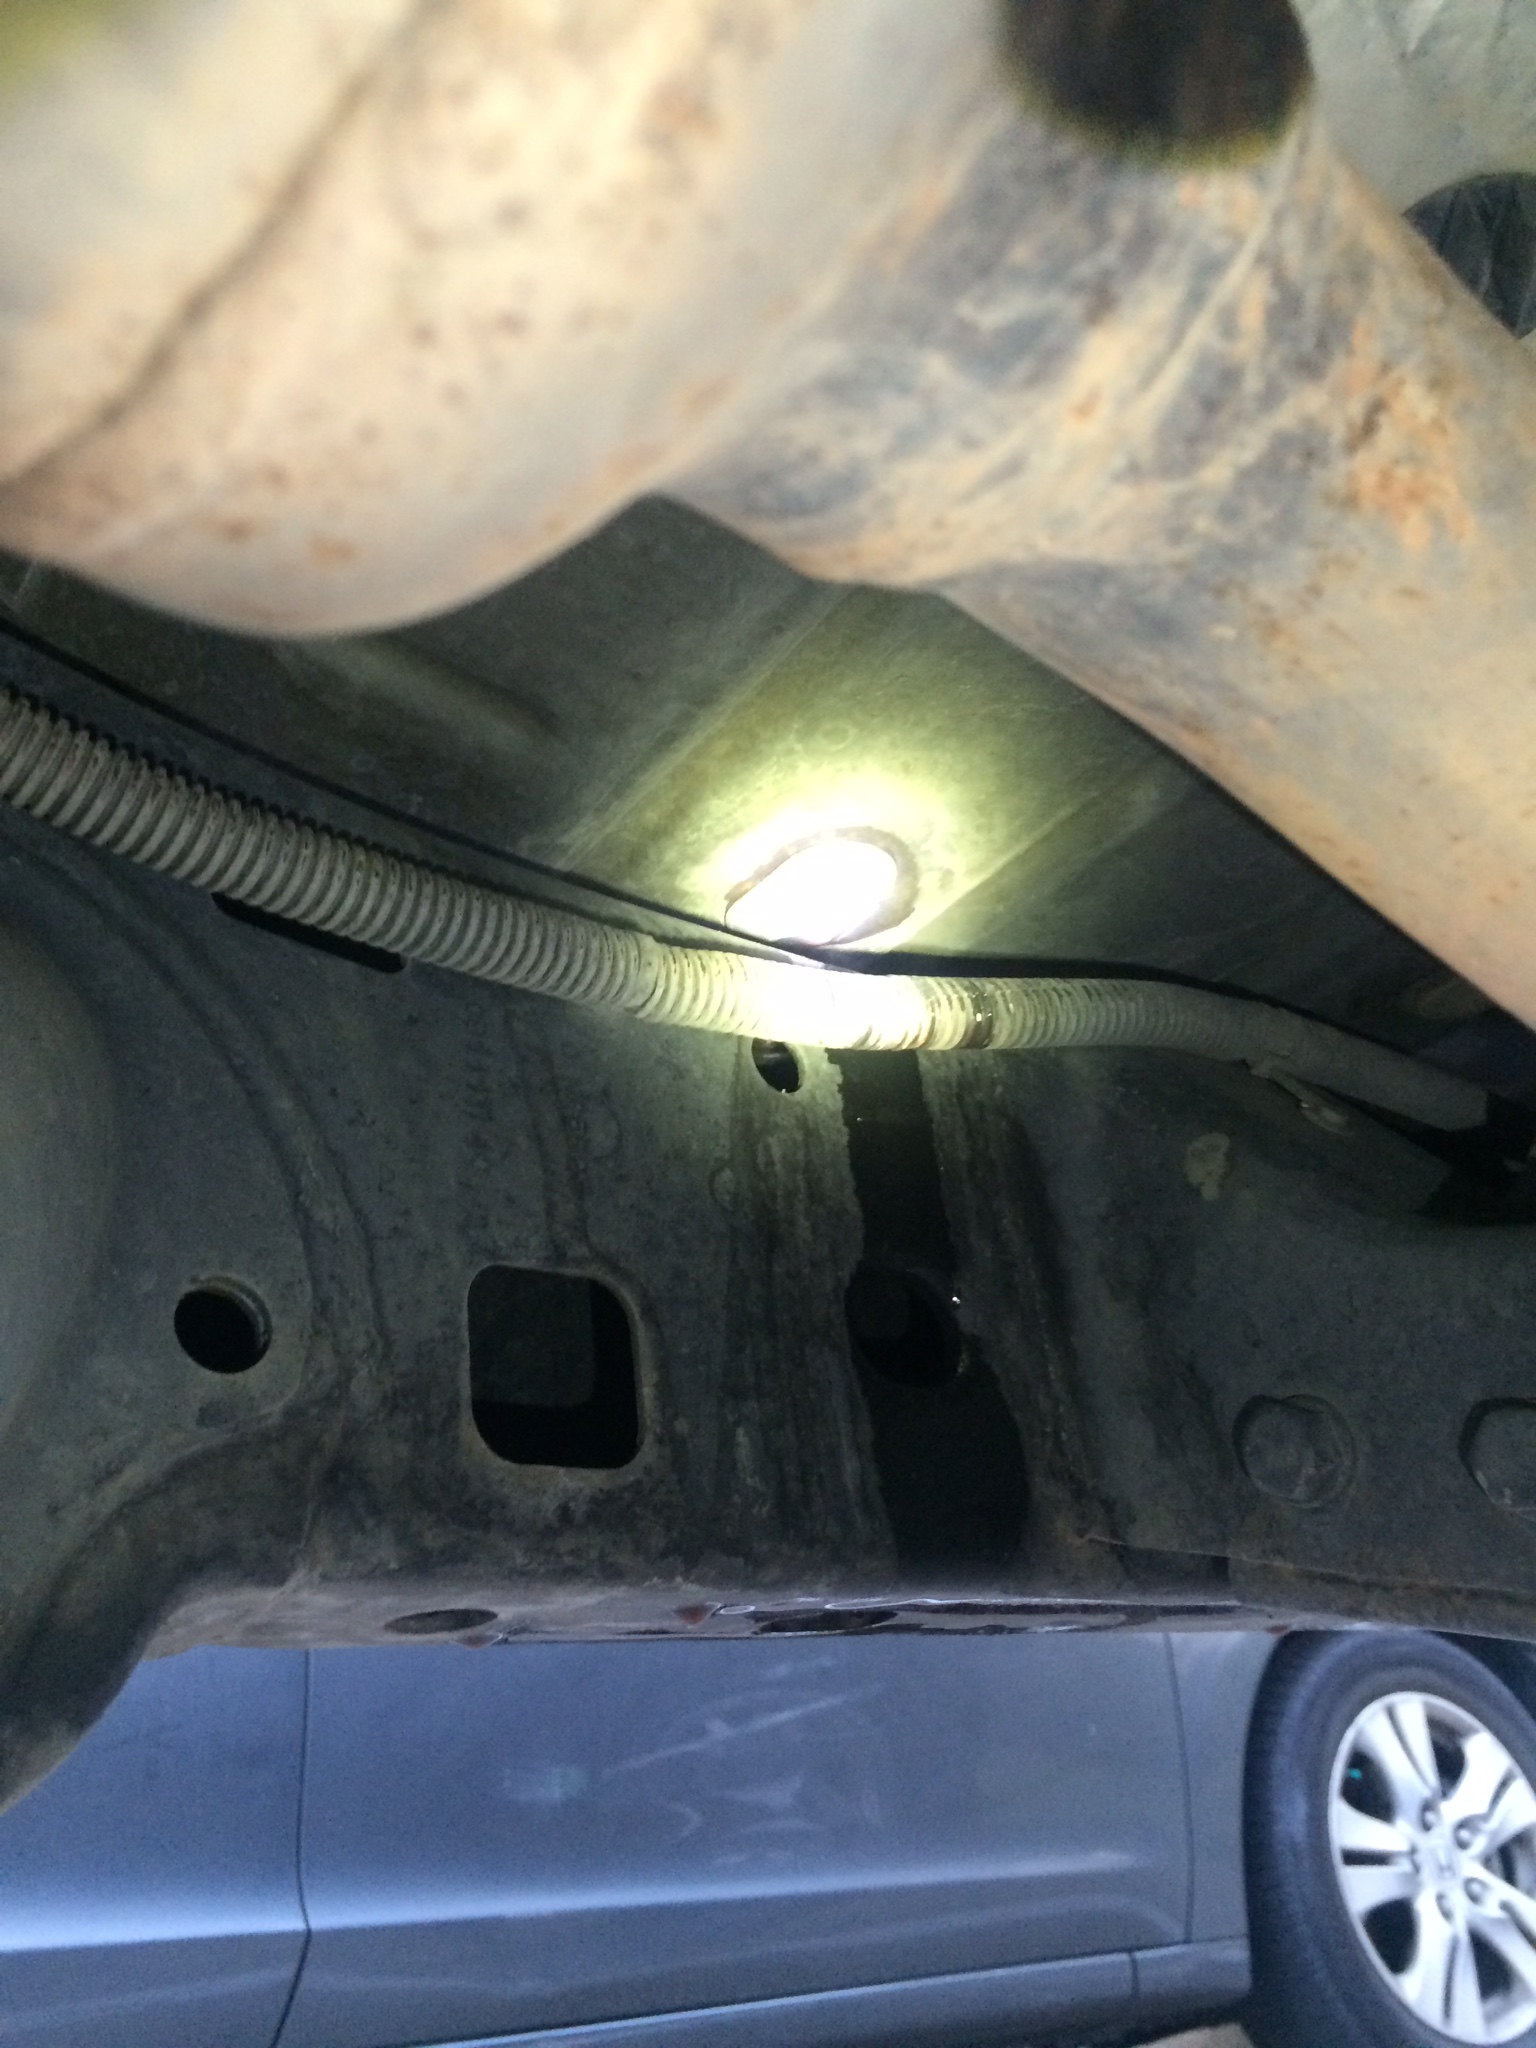 Passenger side coolant leak  - The top destination for Jeep JK  and JL Wrangler news, rumors, and discussion